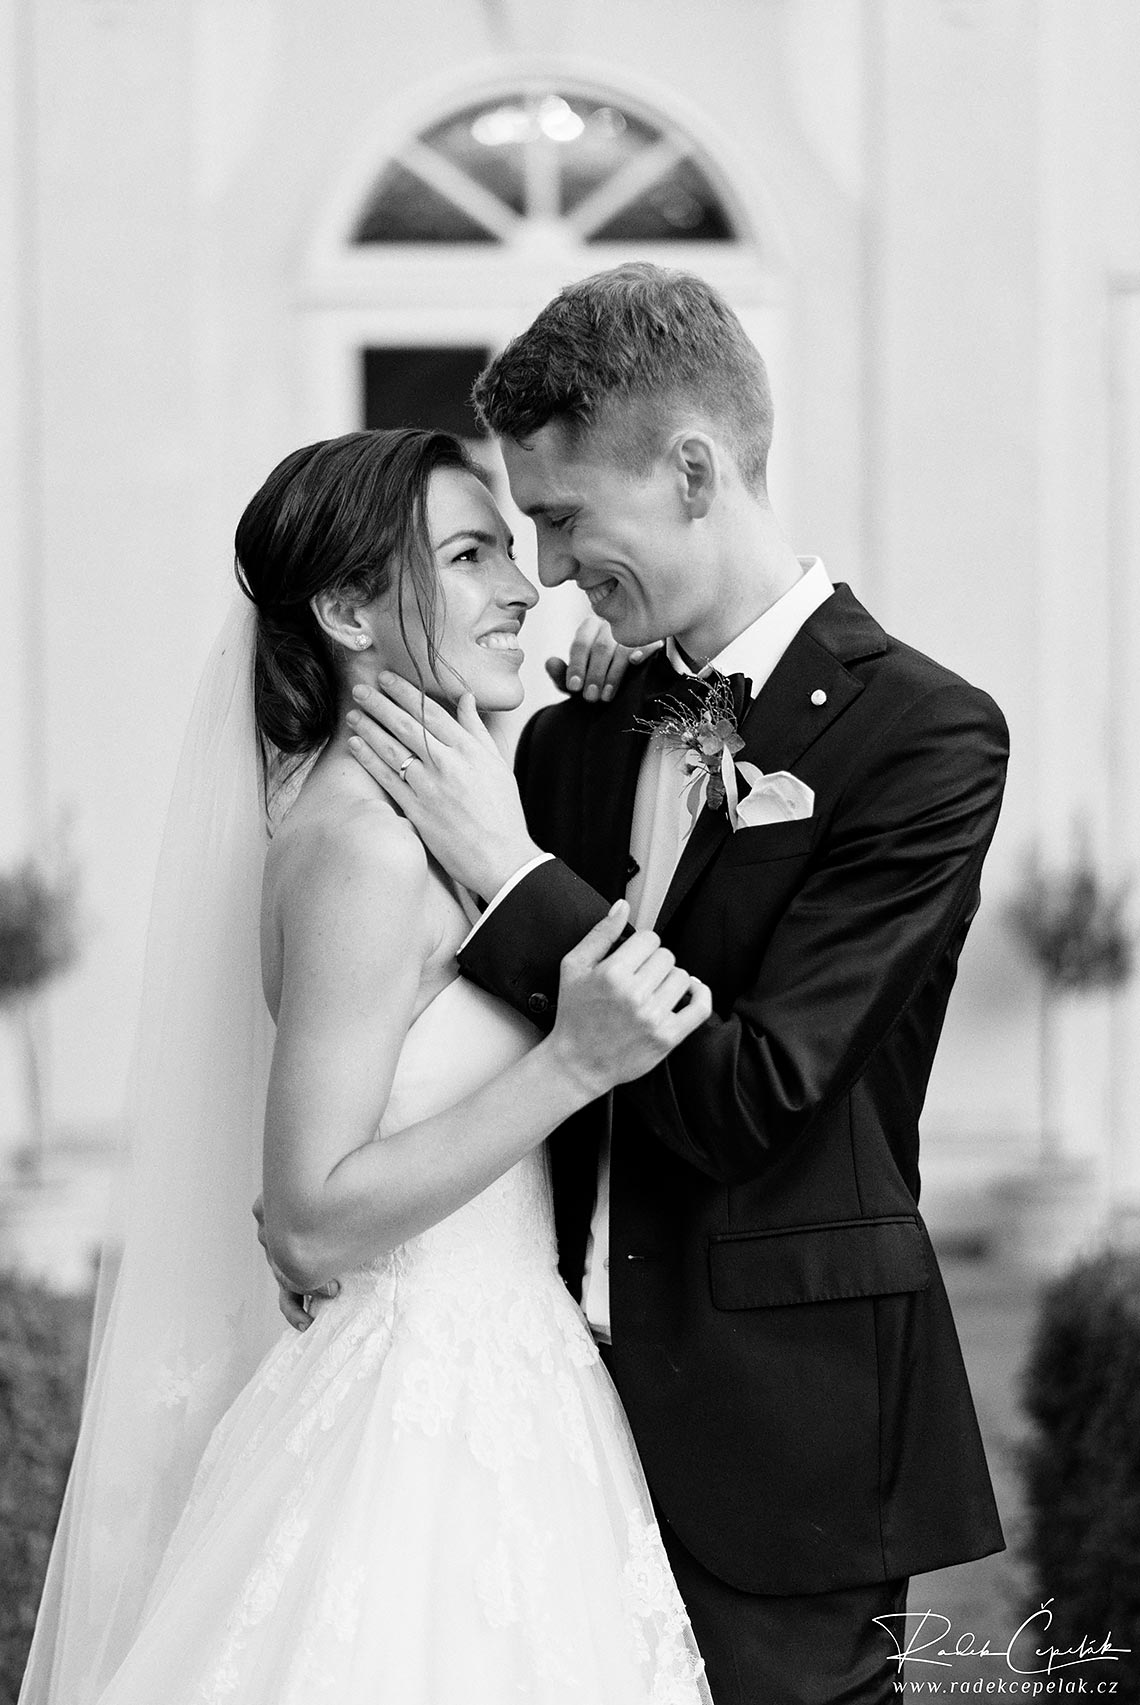 black and white wedding photography of bride and groom